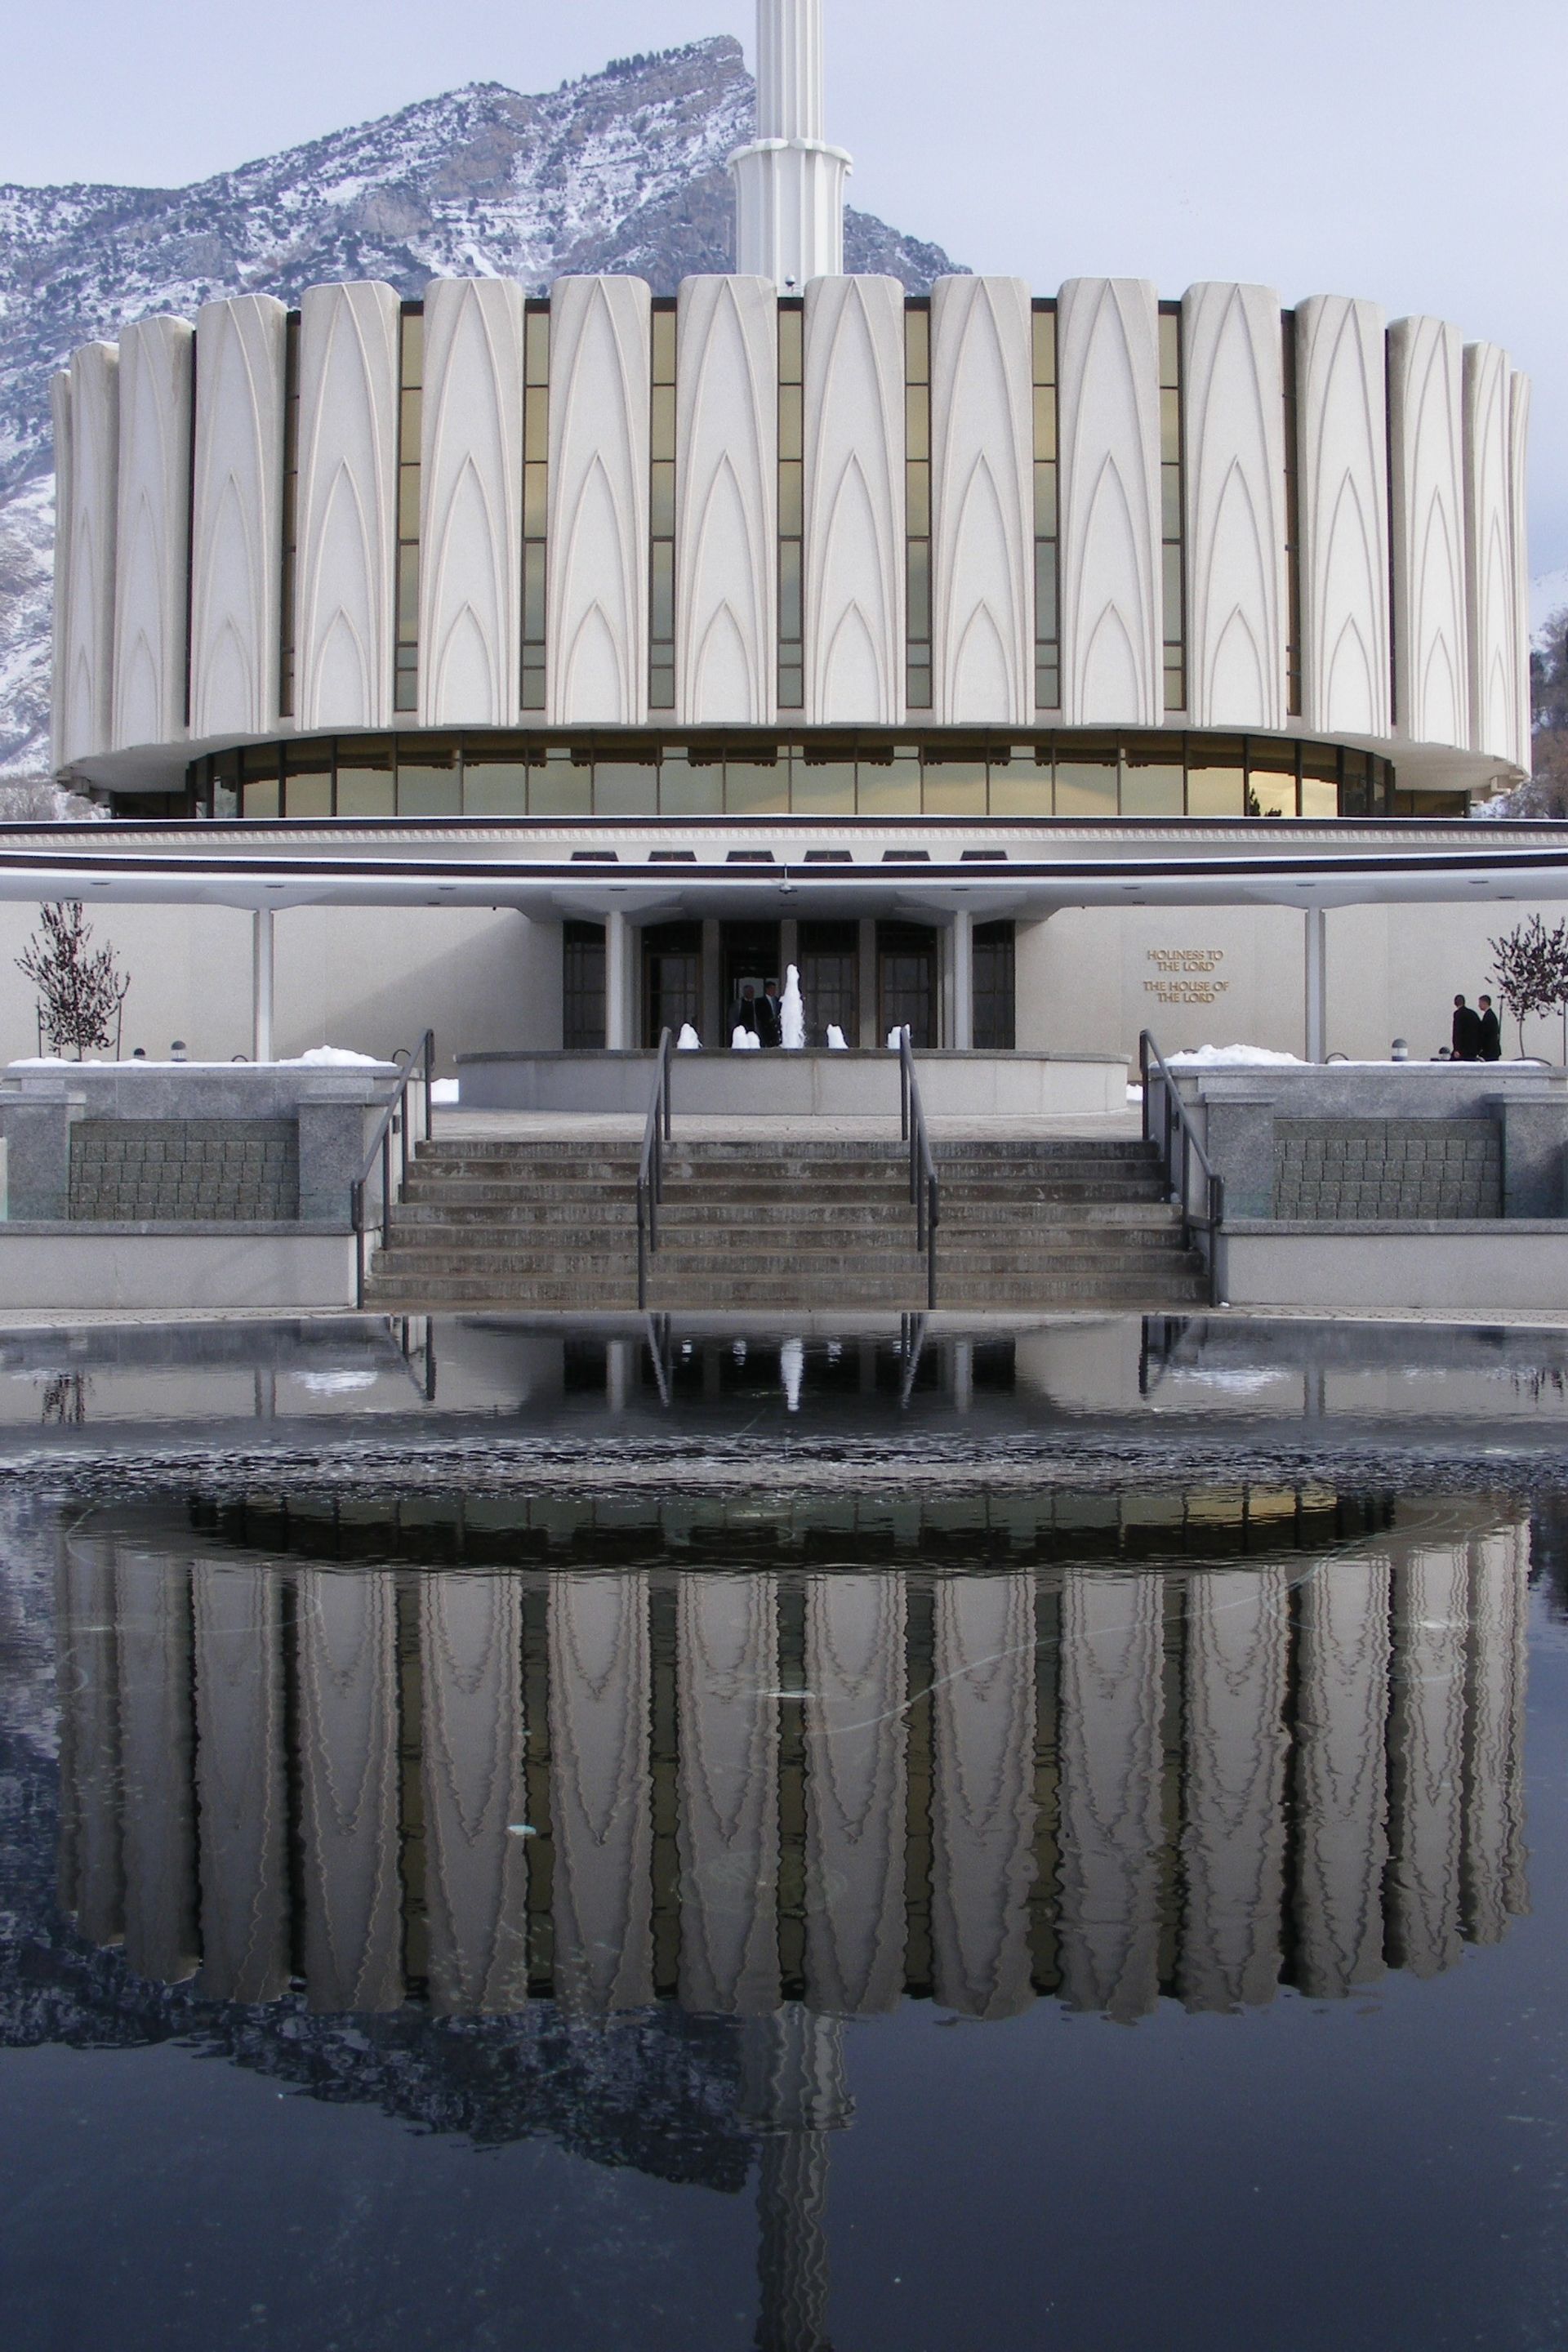 The Provo Utah Temple reflecting pond, including the exterior of the temple.